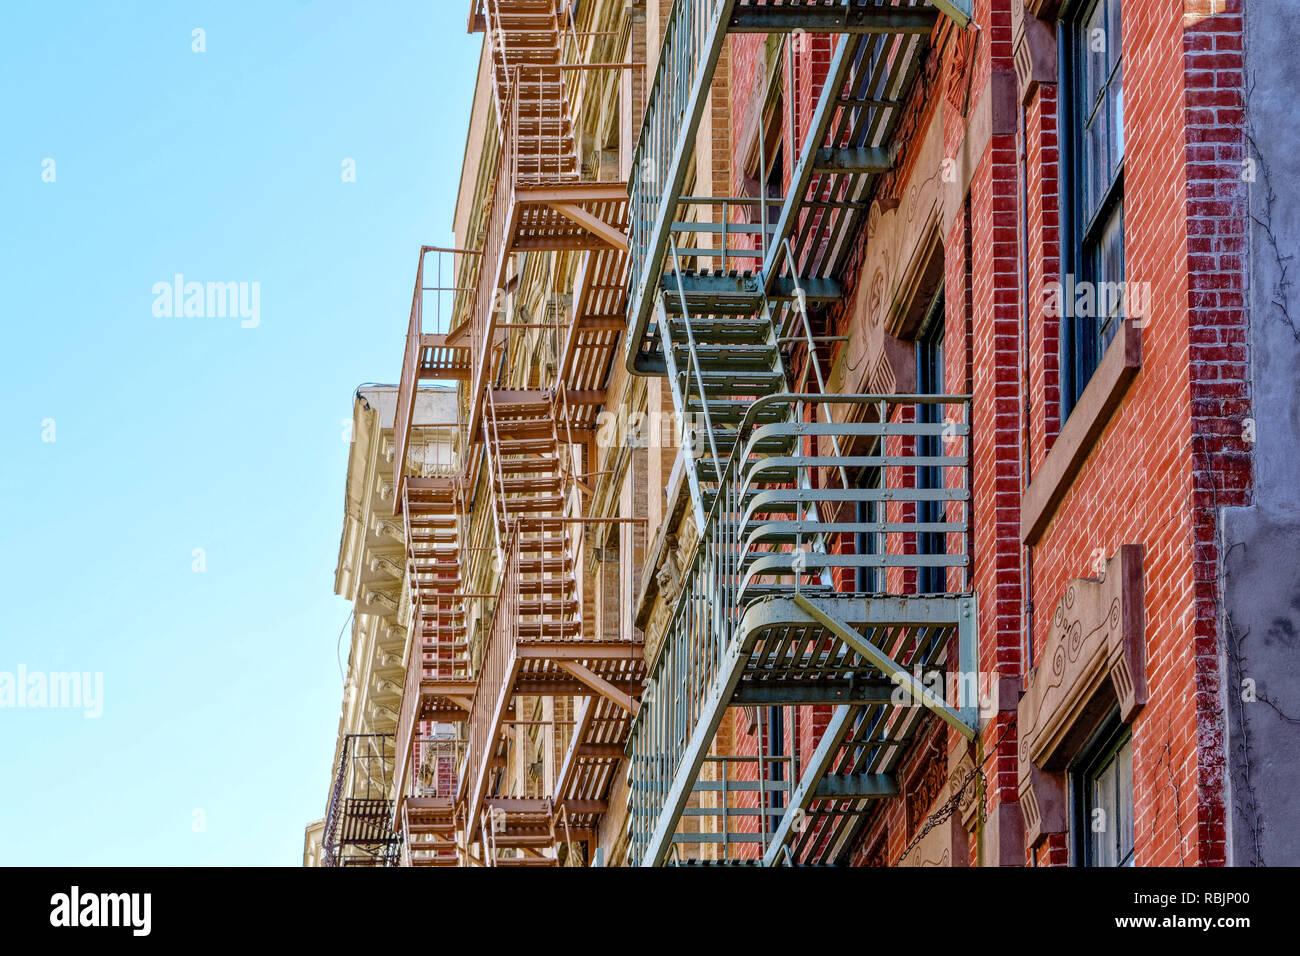 New-York building facades with fire escape stairs close up view Stock Photo